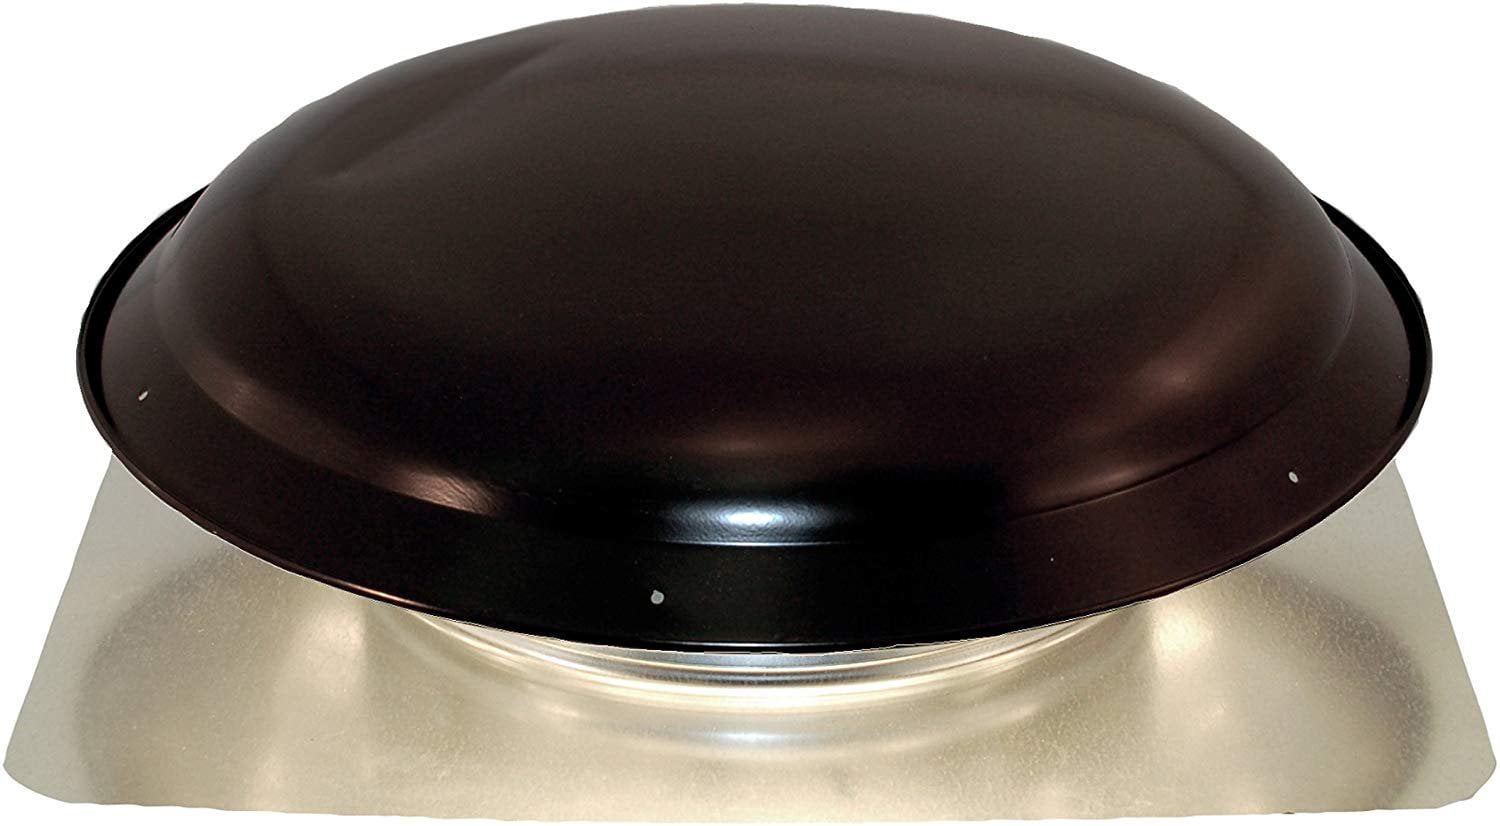 Cool Attic CX1000AMBL Power Roof Galvanized Steel Vent Dome with 3.4 Amp Motor Black